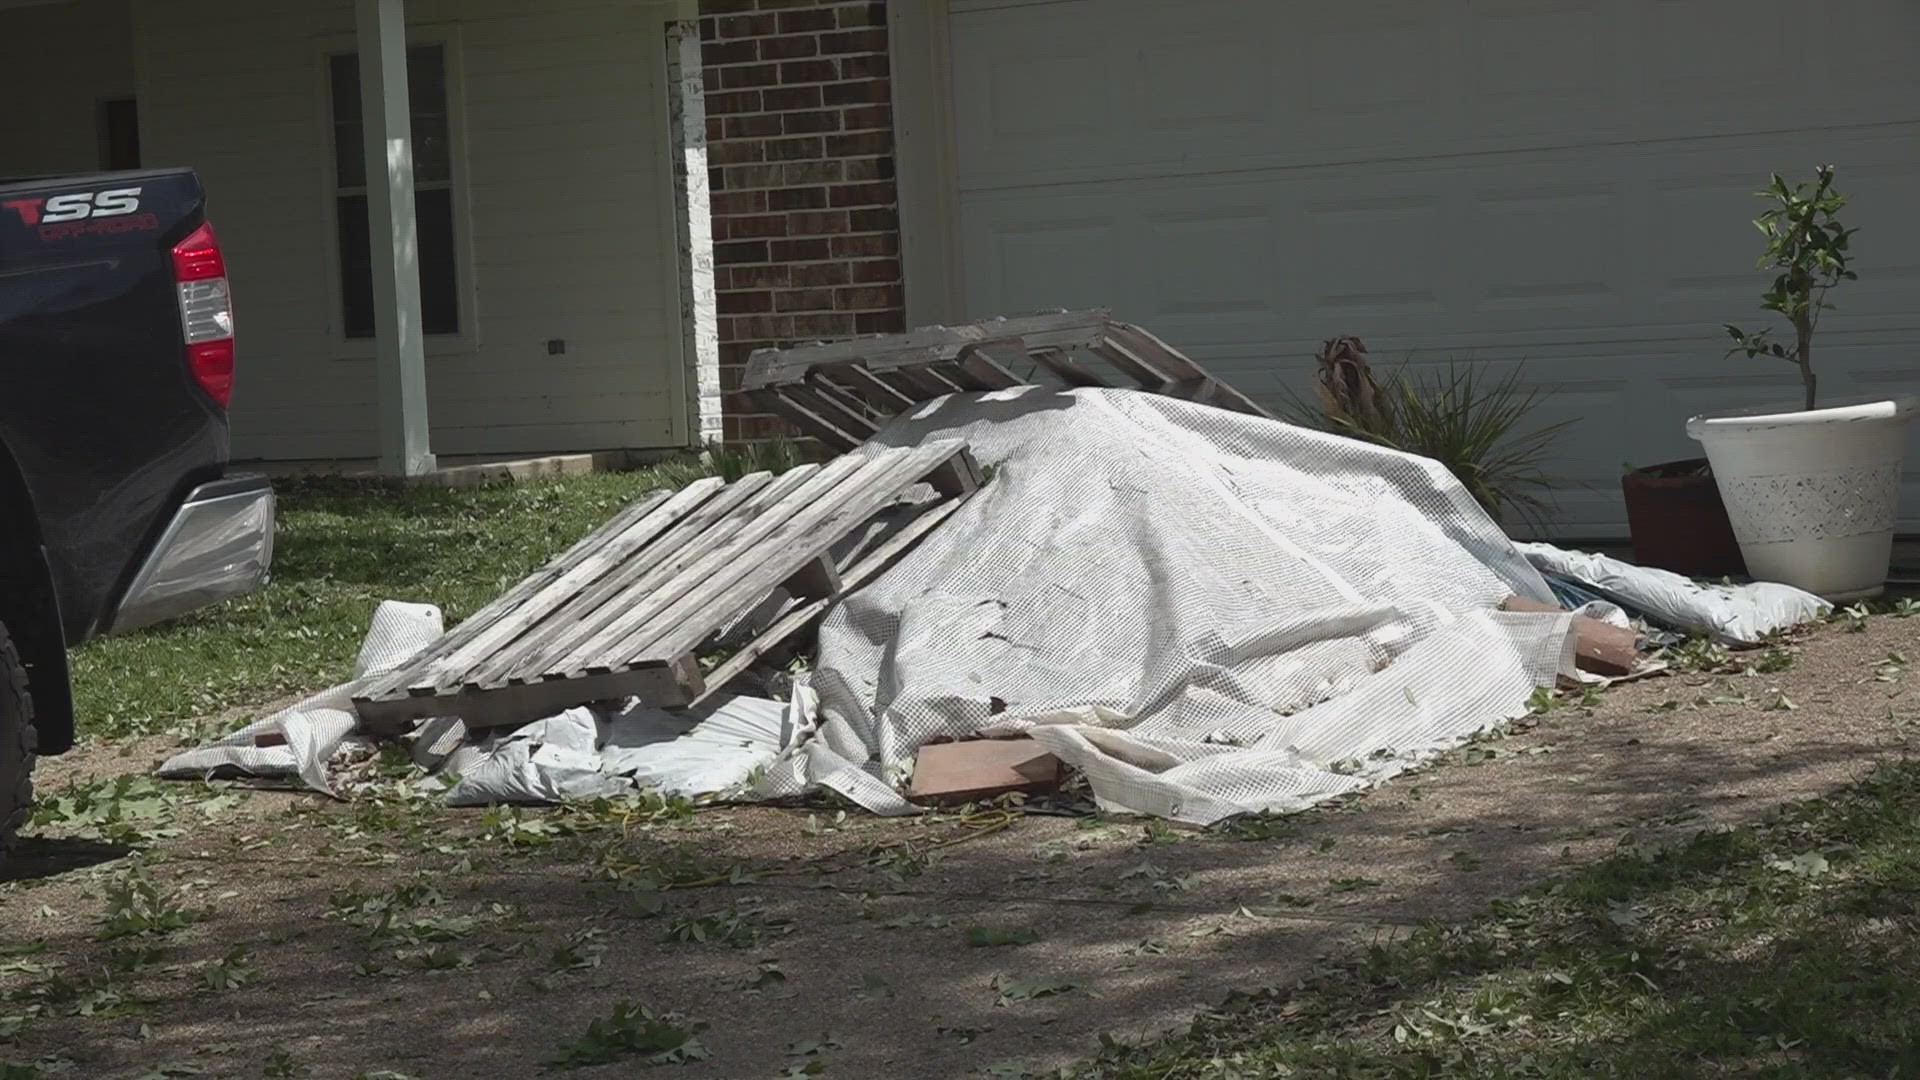 Recovering from a harsh storm can be difficult, but it can be even harder if you get scammed.